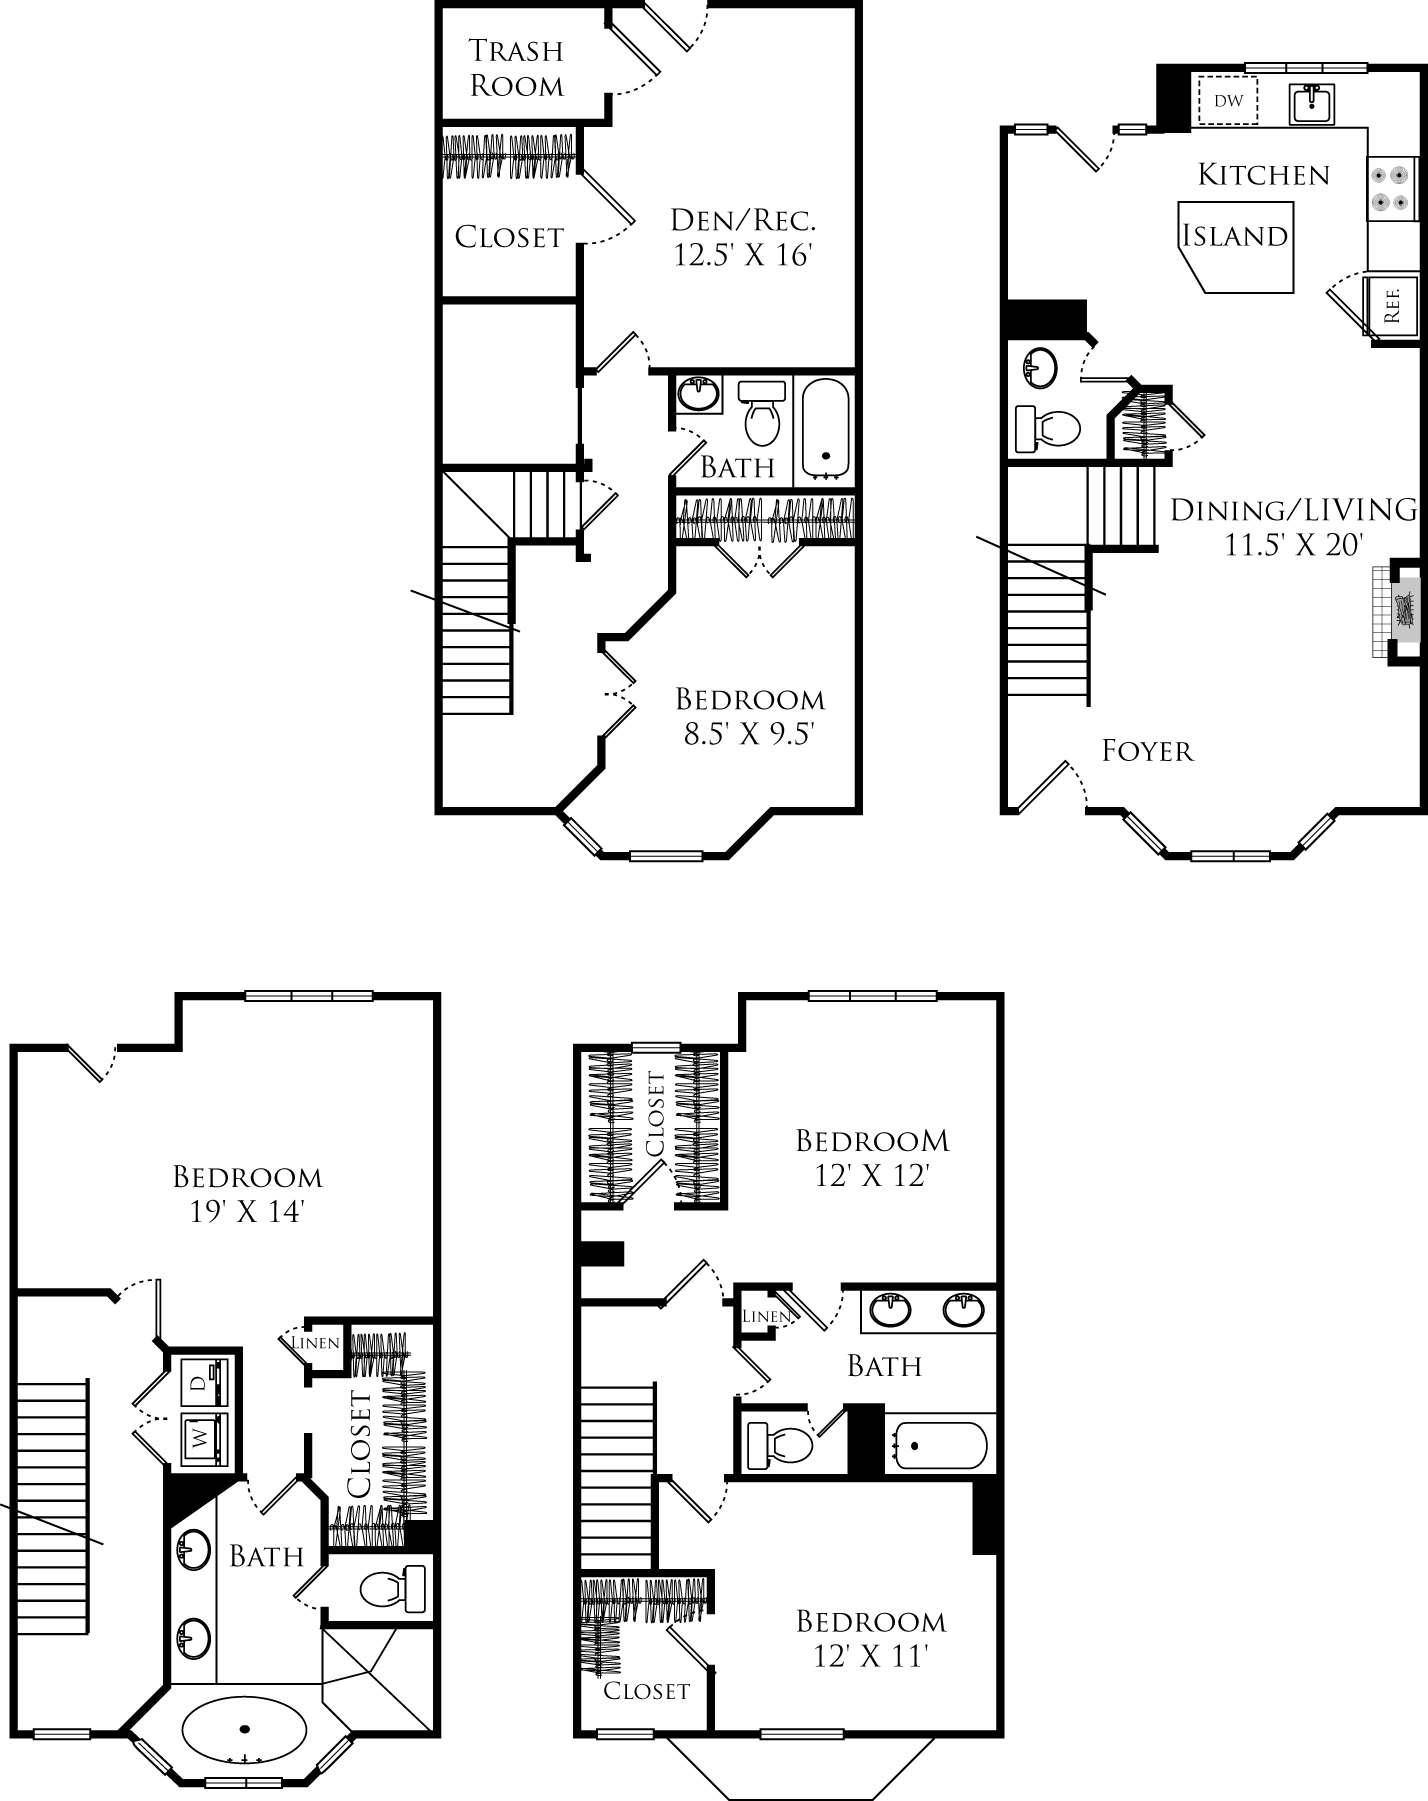 D4A townhouse floor plan is 4 beds, 3.5 baths and is 2832 square feet